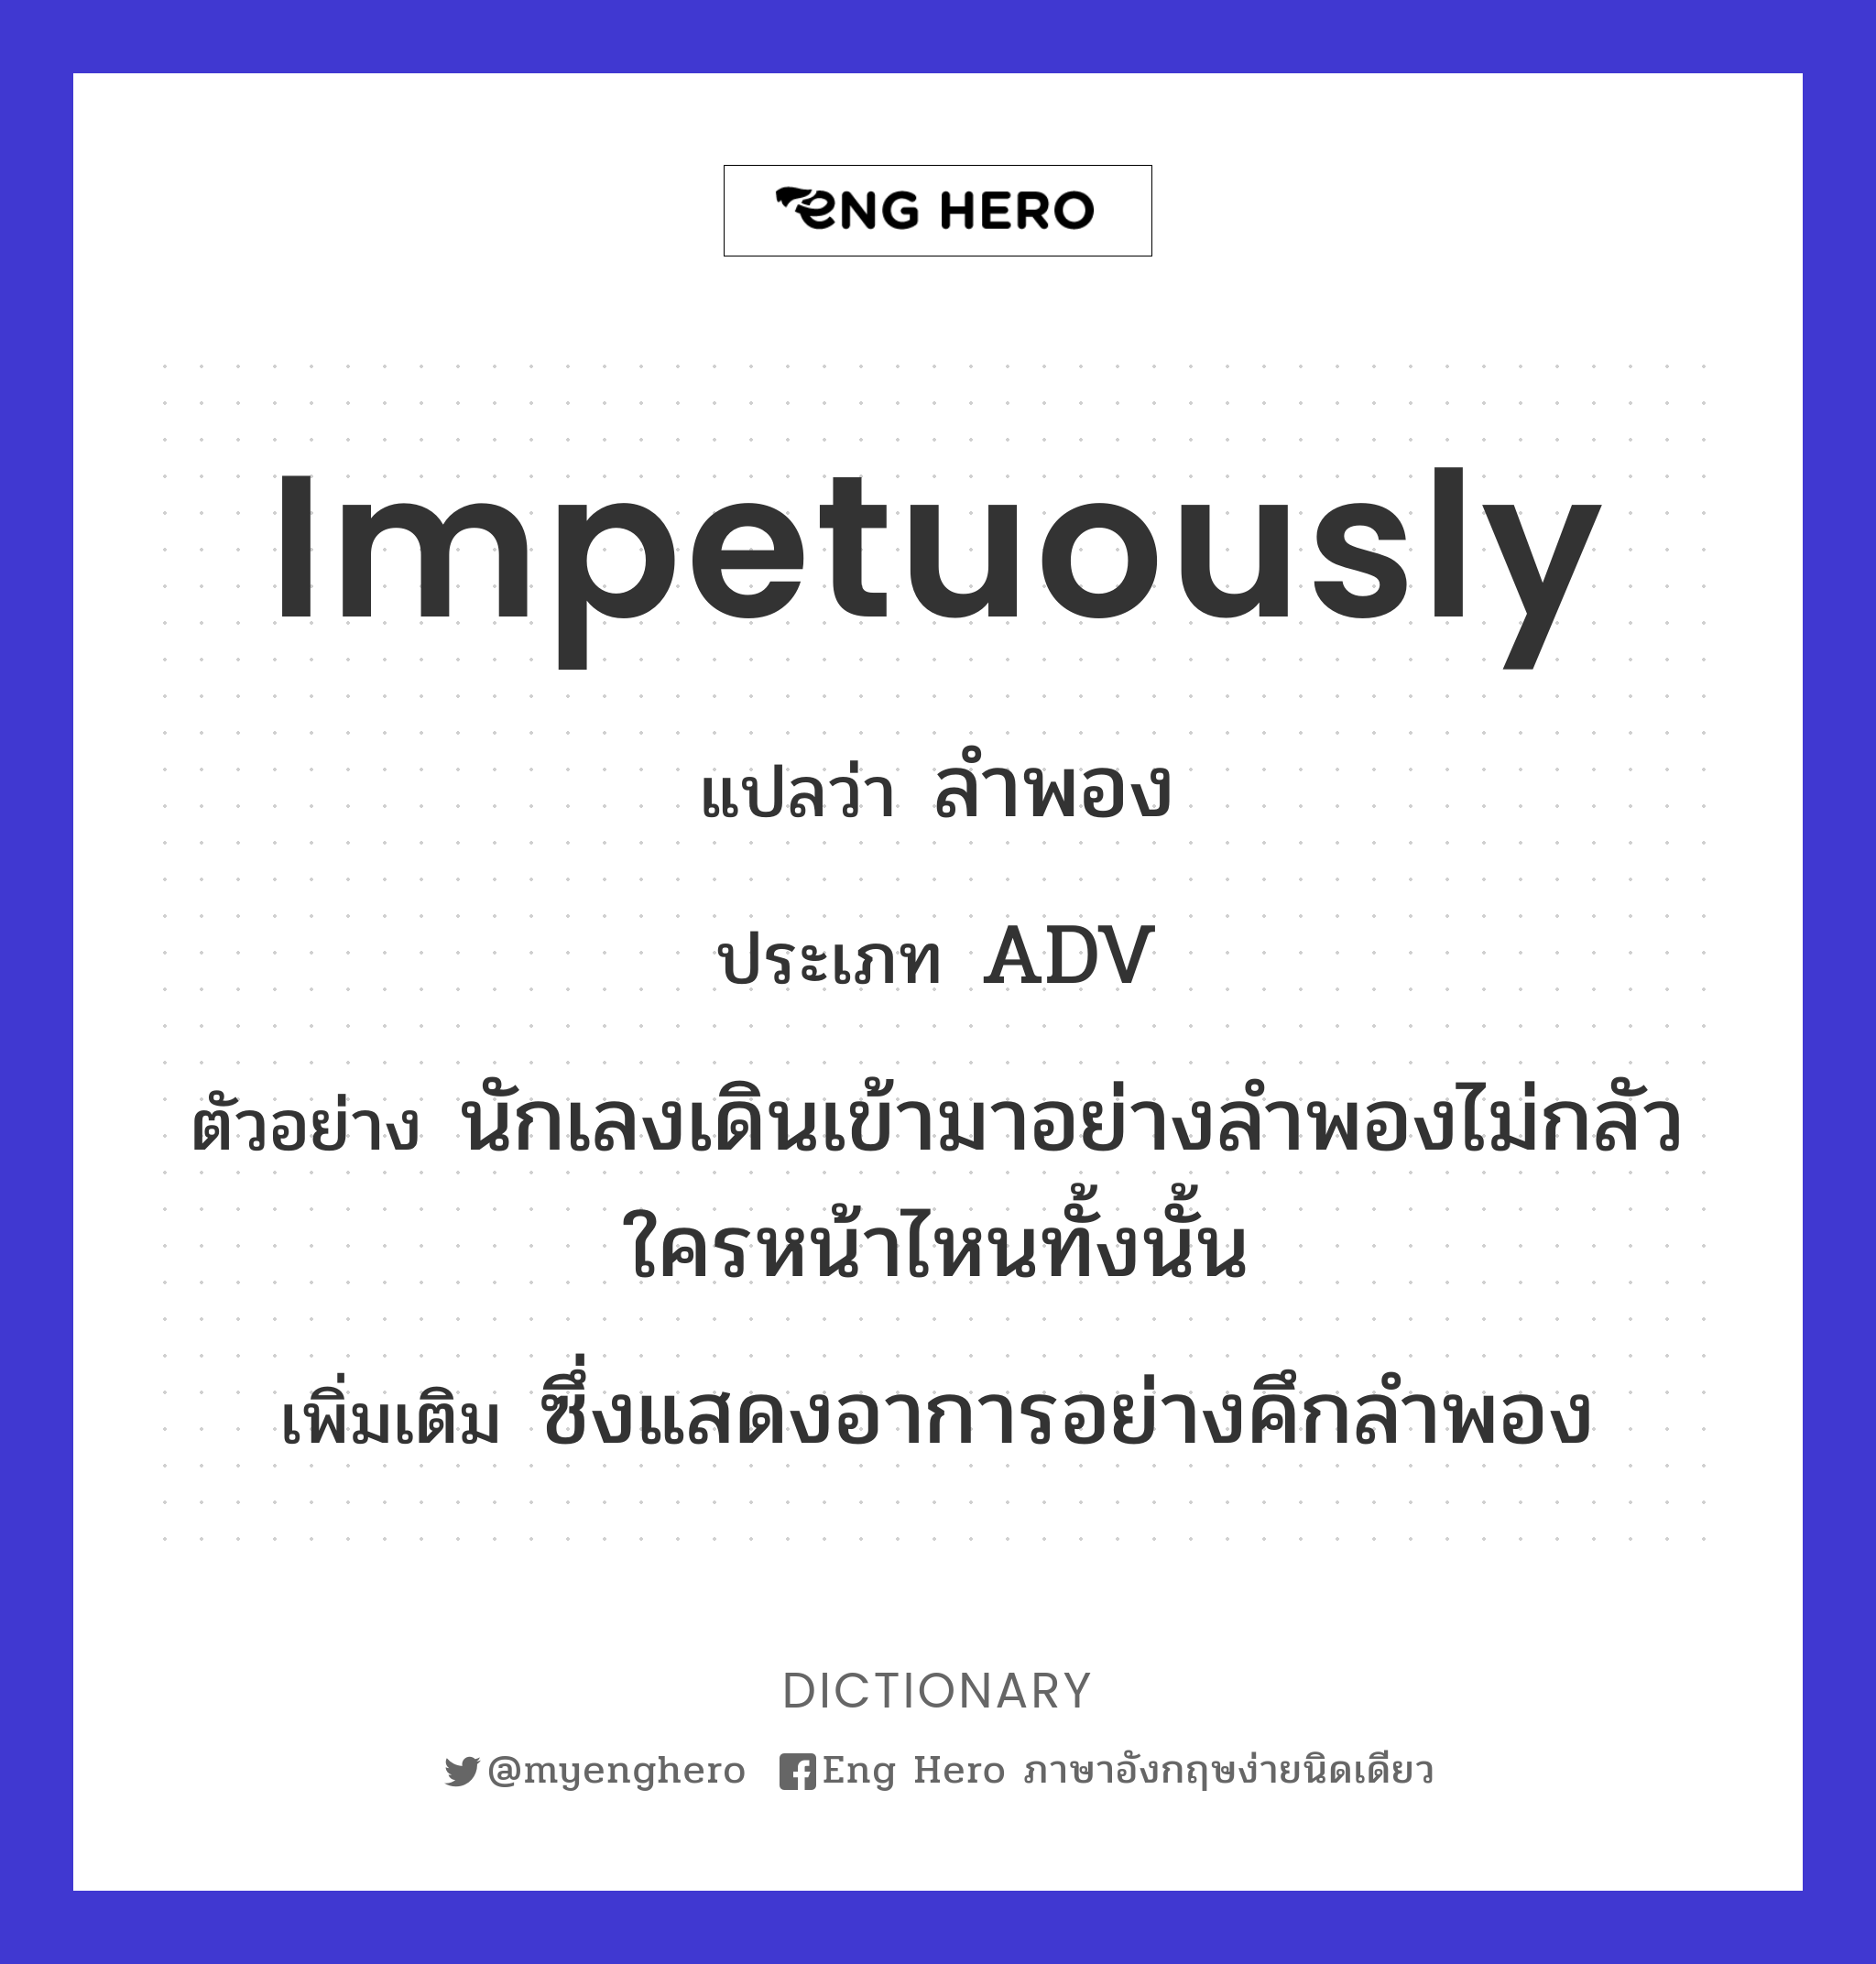 impetuously